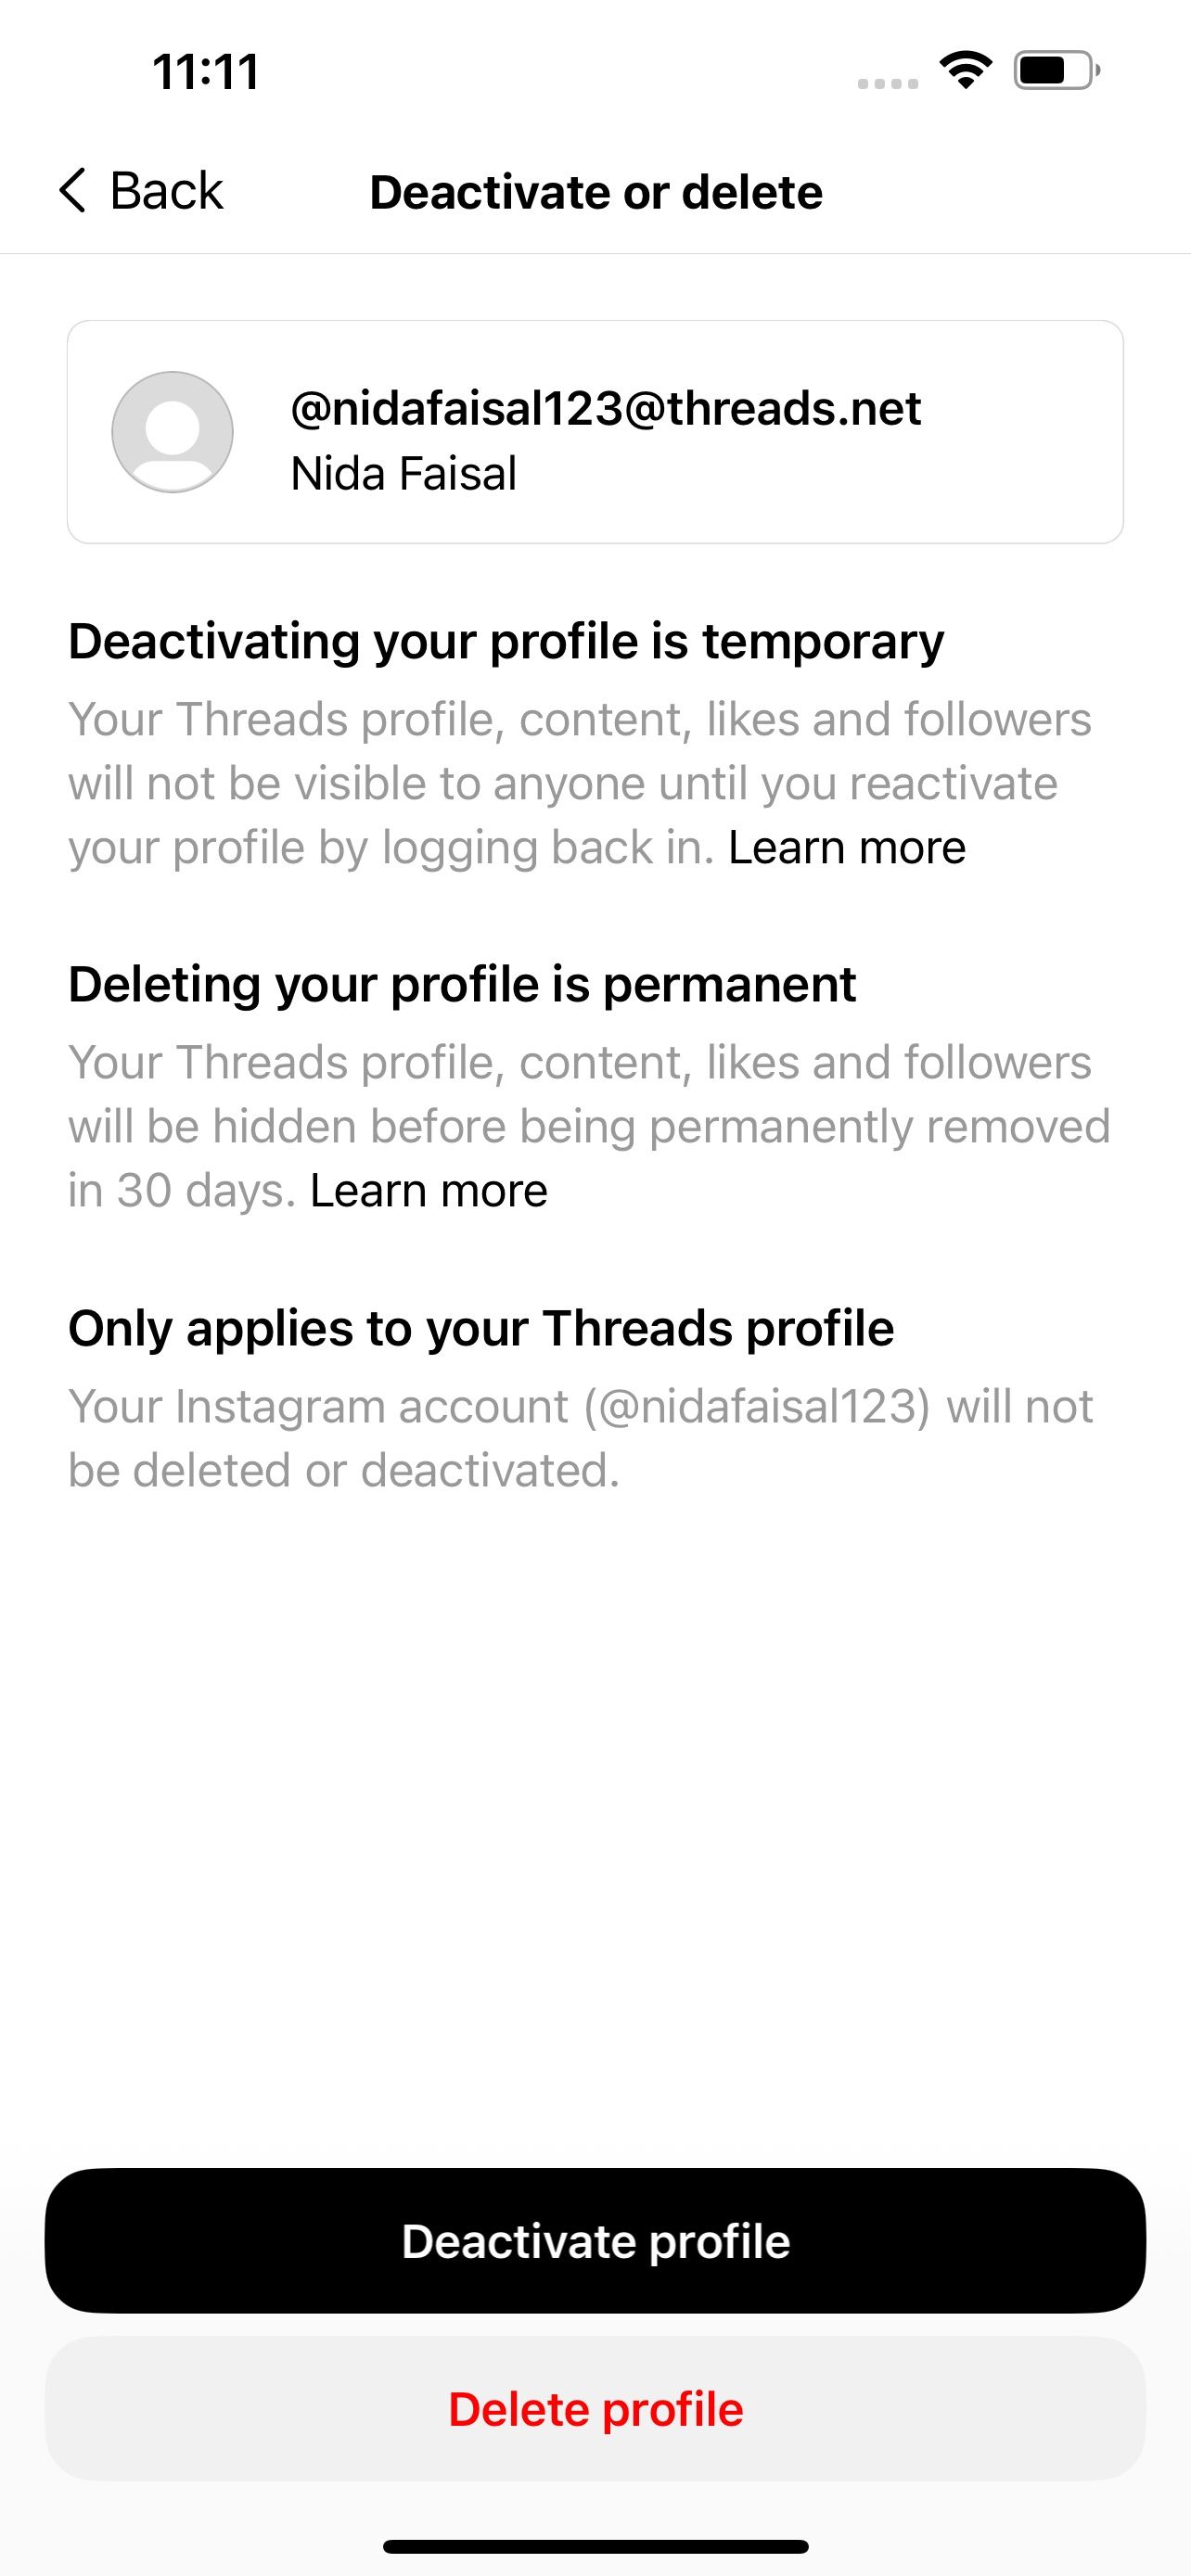 You Can Now Delete Your Threads Account Without Deleting Your Instagram 2033